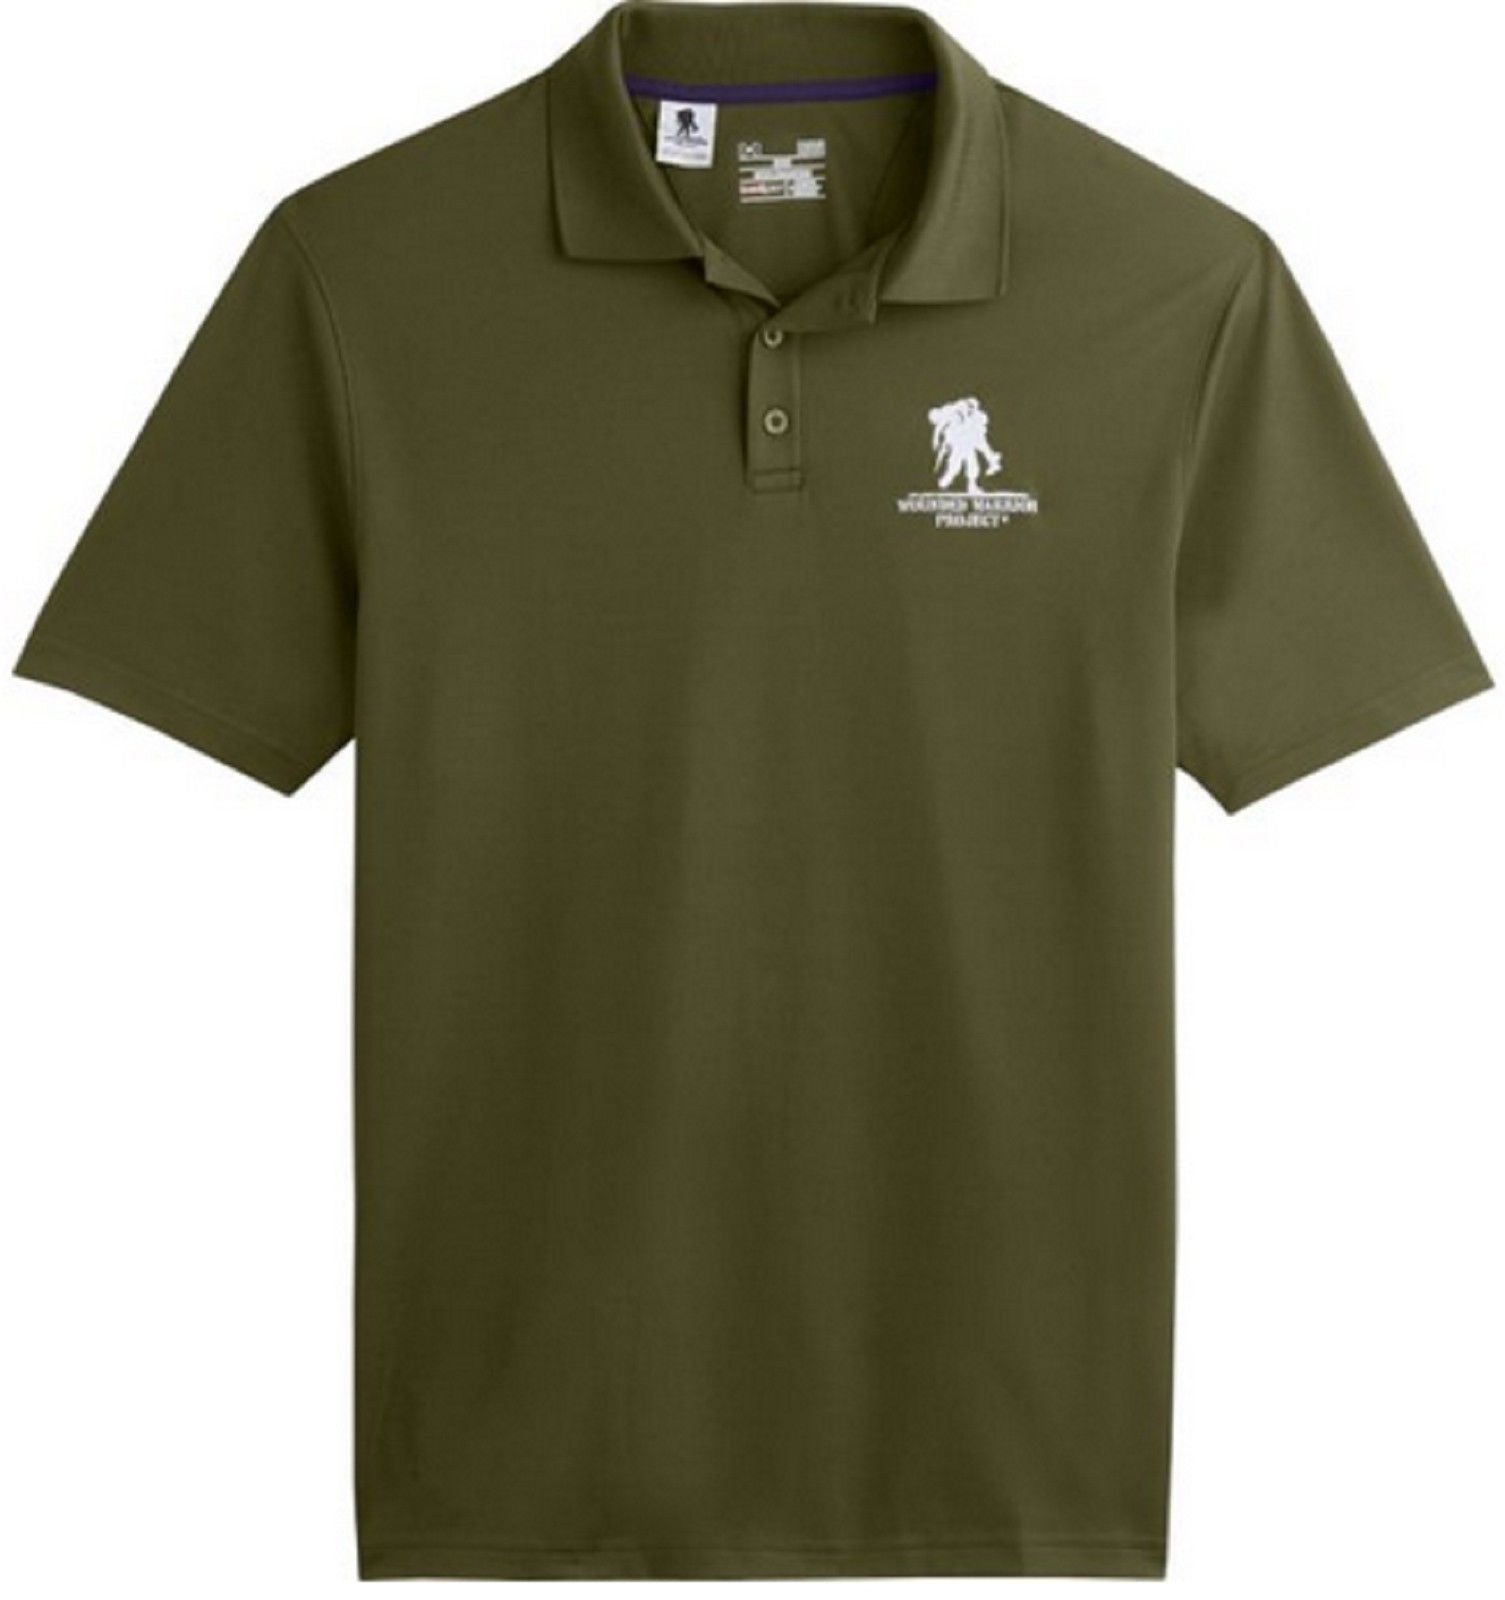 wounded warrior project polo